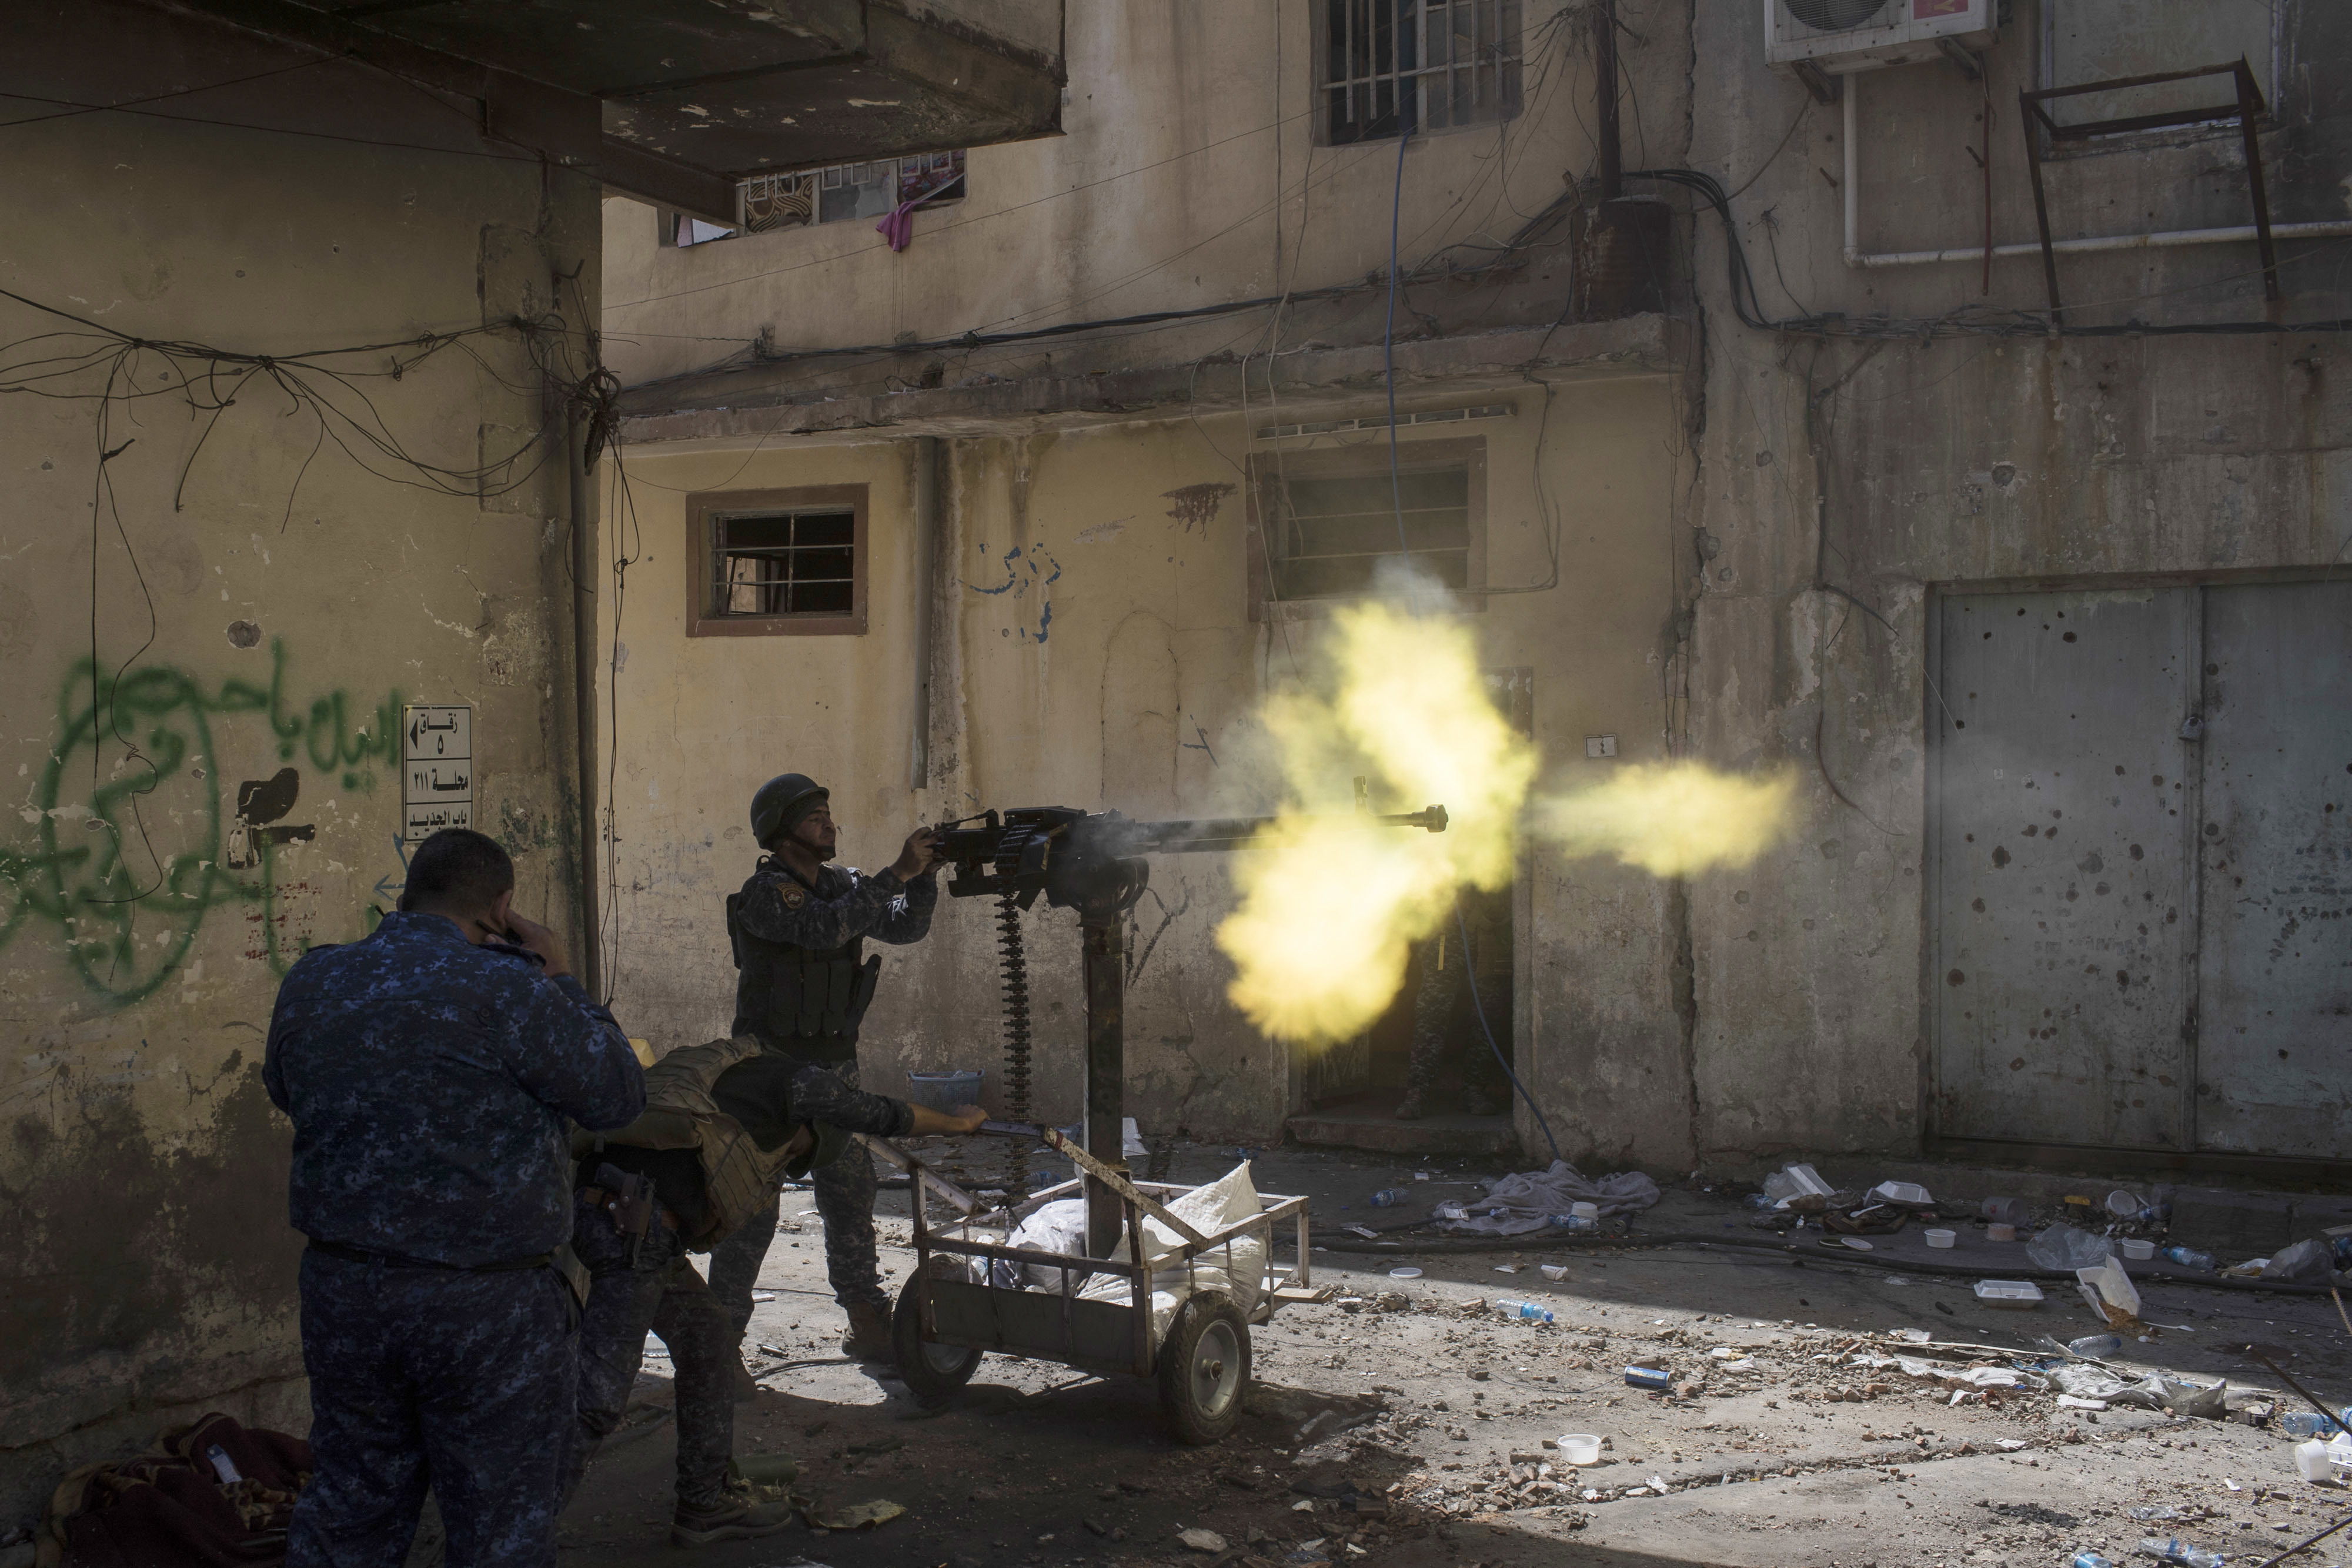 Federal policemen fire towards Islamic State positions in the old city during fighting on the western side of Mosul, Iraq, Thursday, March 30, 2017. (AP Photo/Felipe Dana)